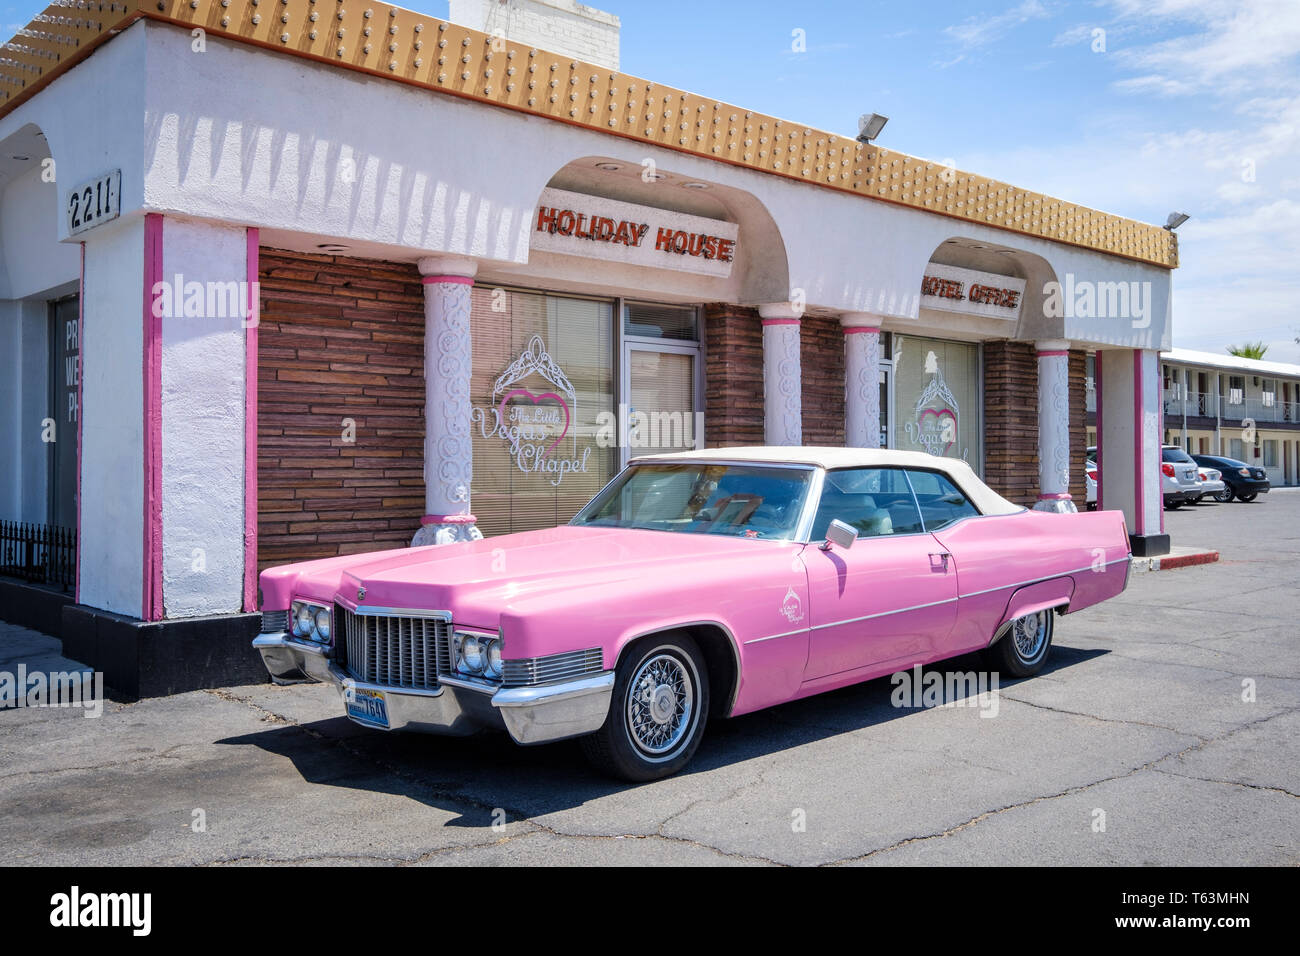 The Little Vegas Chapel Pink Cadillac at Holiday House motel in Las Vegas,  Nevada, USA Stock Photo - Alamy